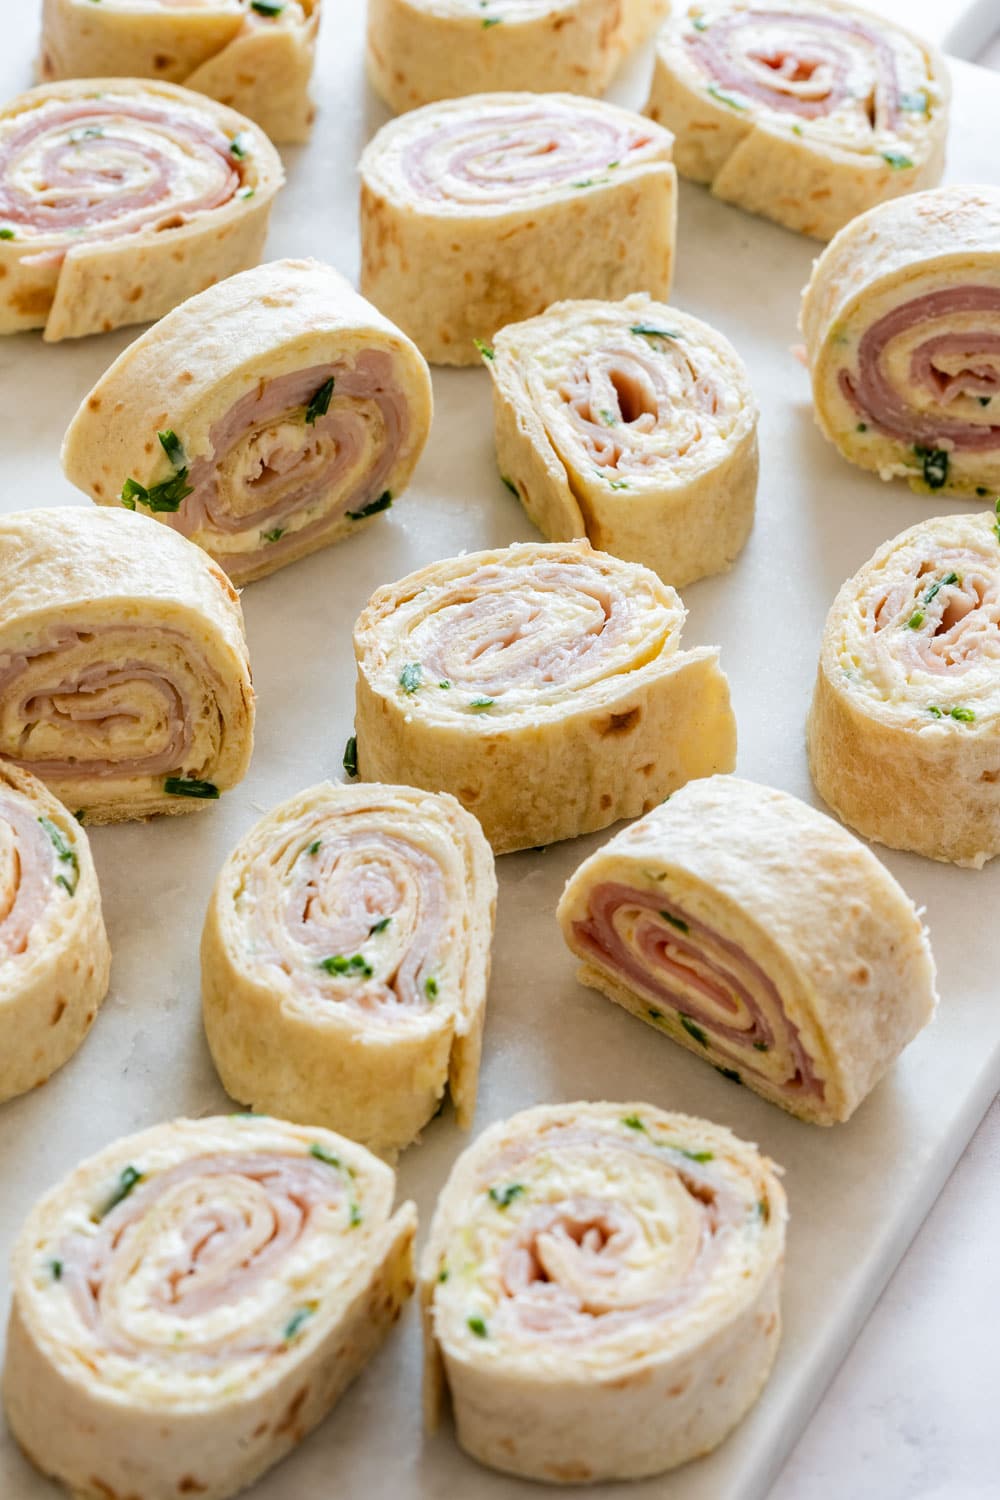 Turkey pinwheels with cream cheese and tortillas.